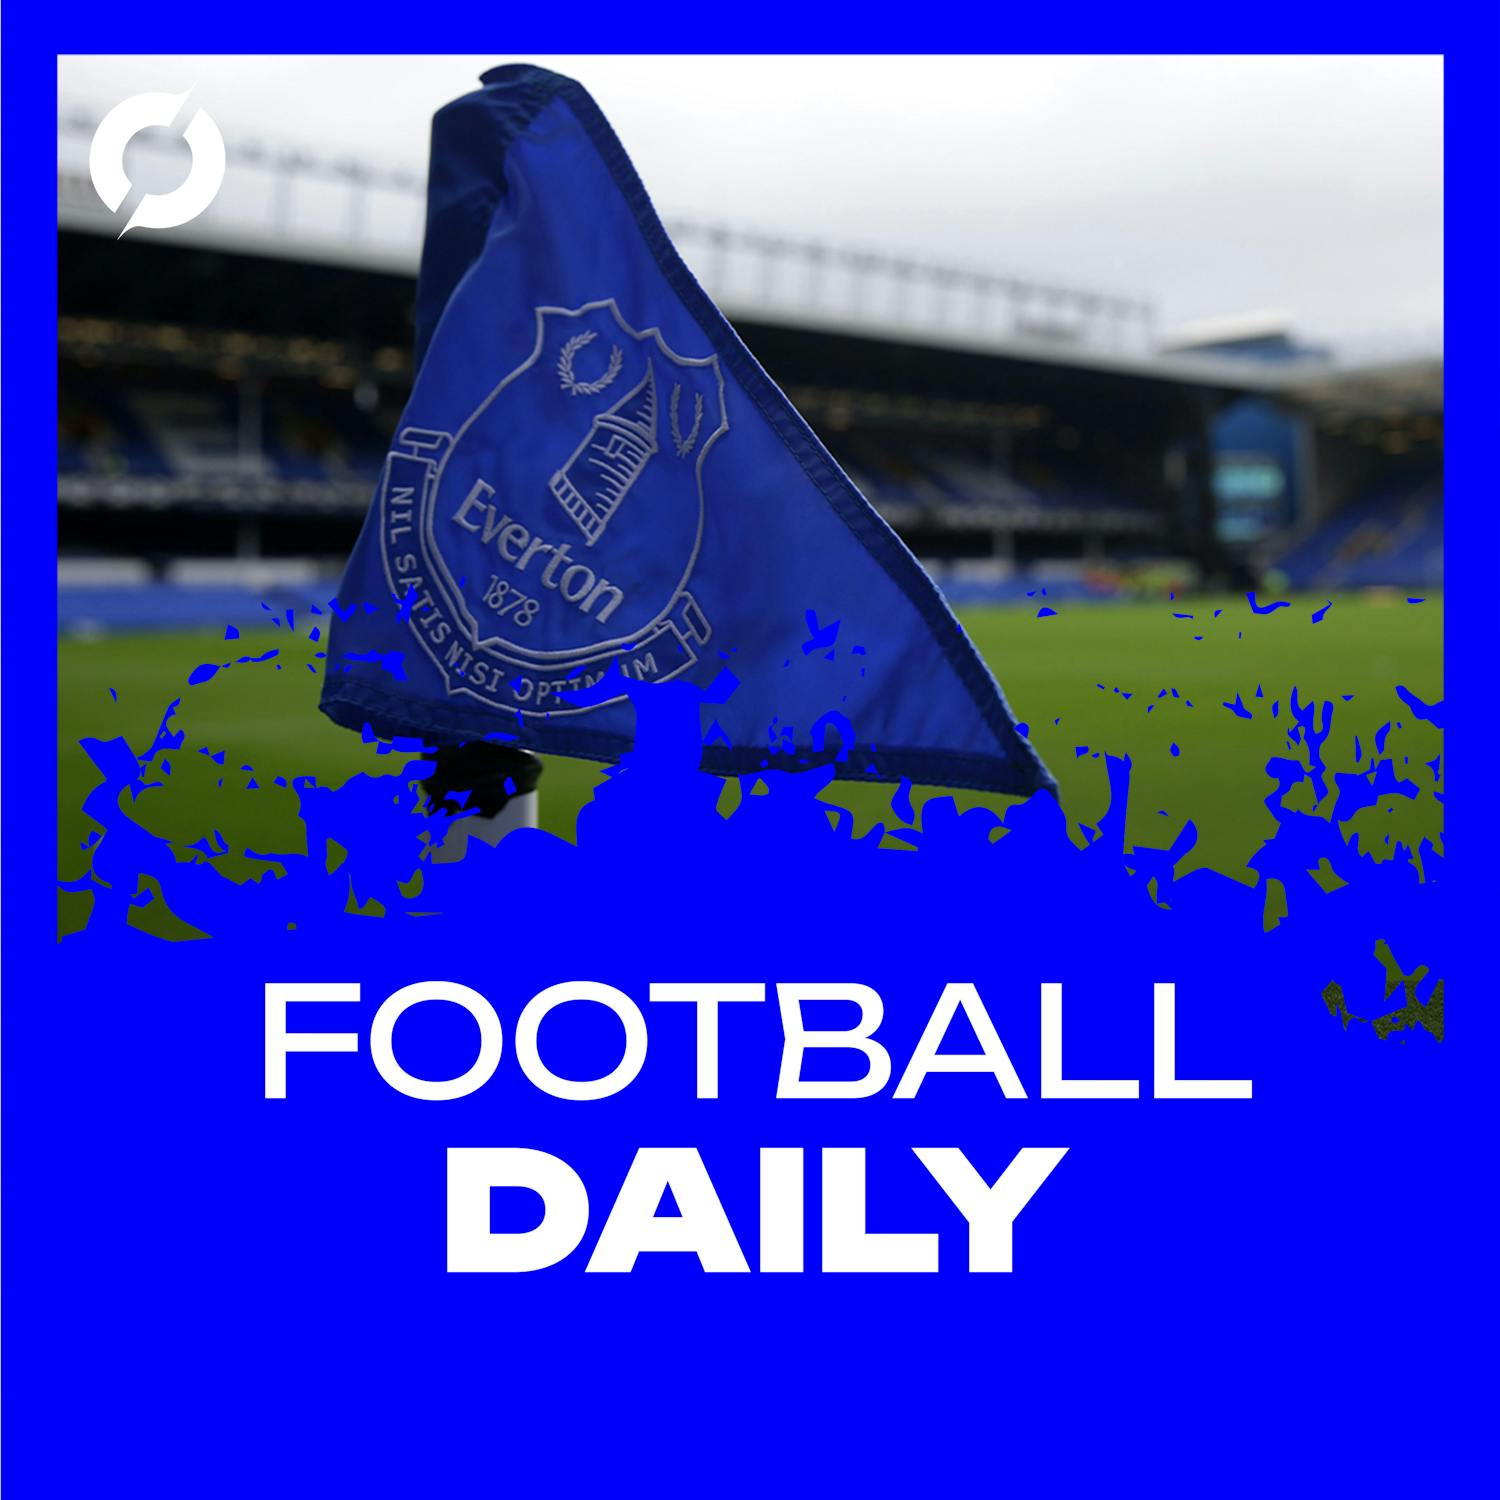 Football Daily: Everton deducted 10 points, Ireland squad in Amsterdam for qualifier, defeats for Argentina and Brazil